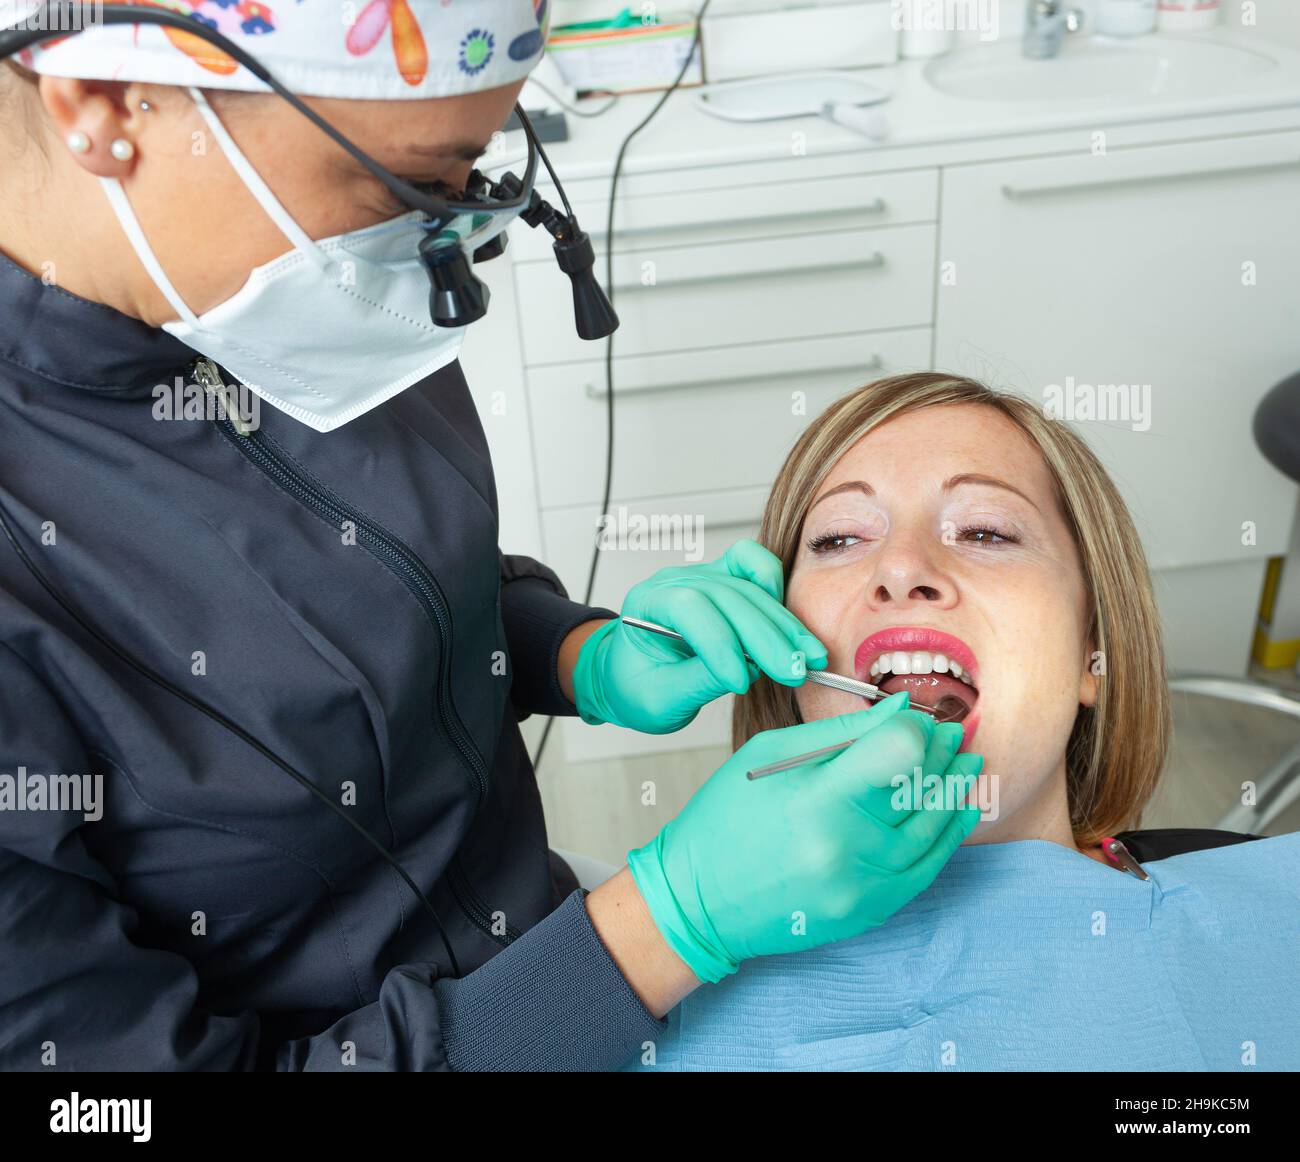 Young Blonde Female patient with open mouth examining dental inspection at dentist office. Stock Photo